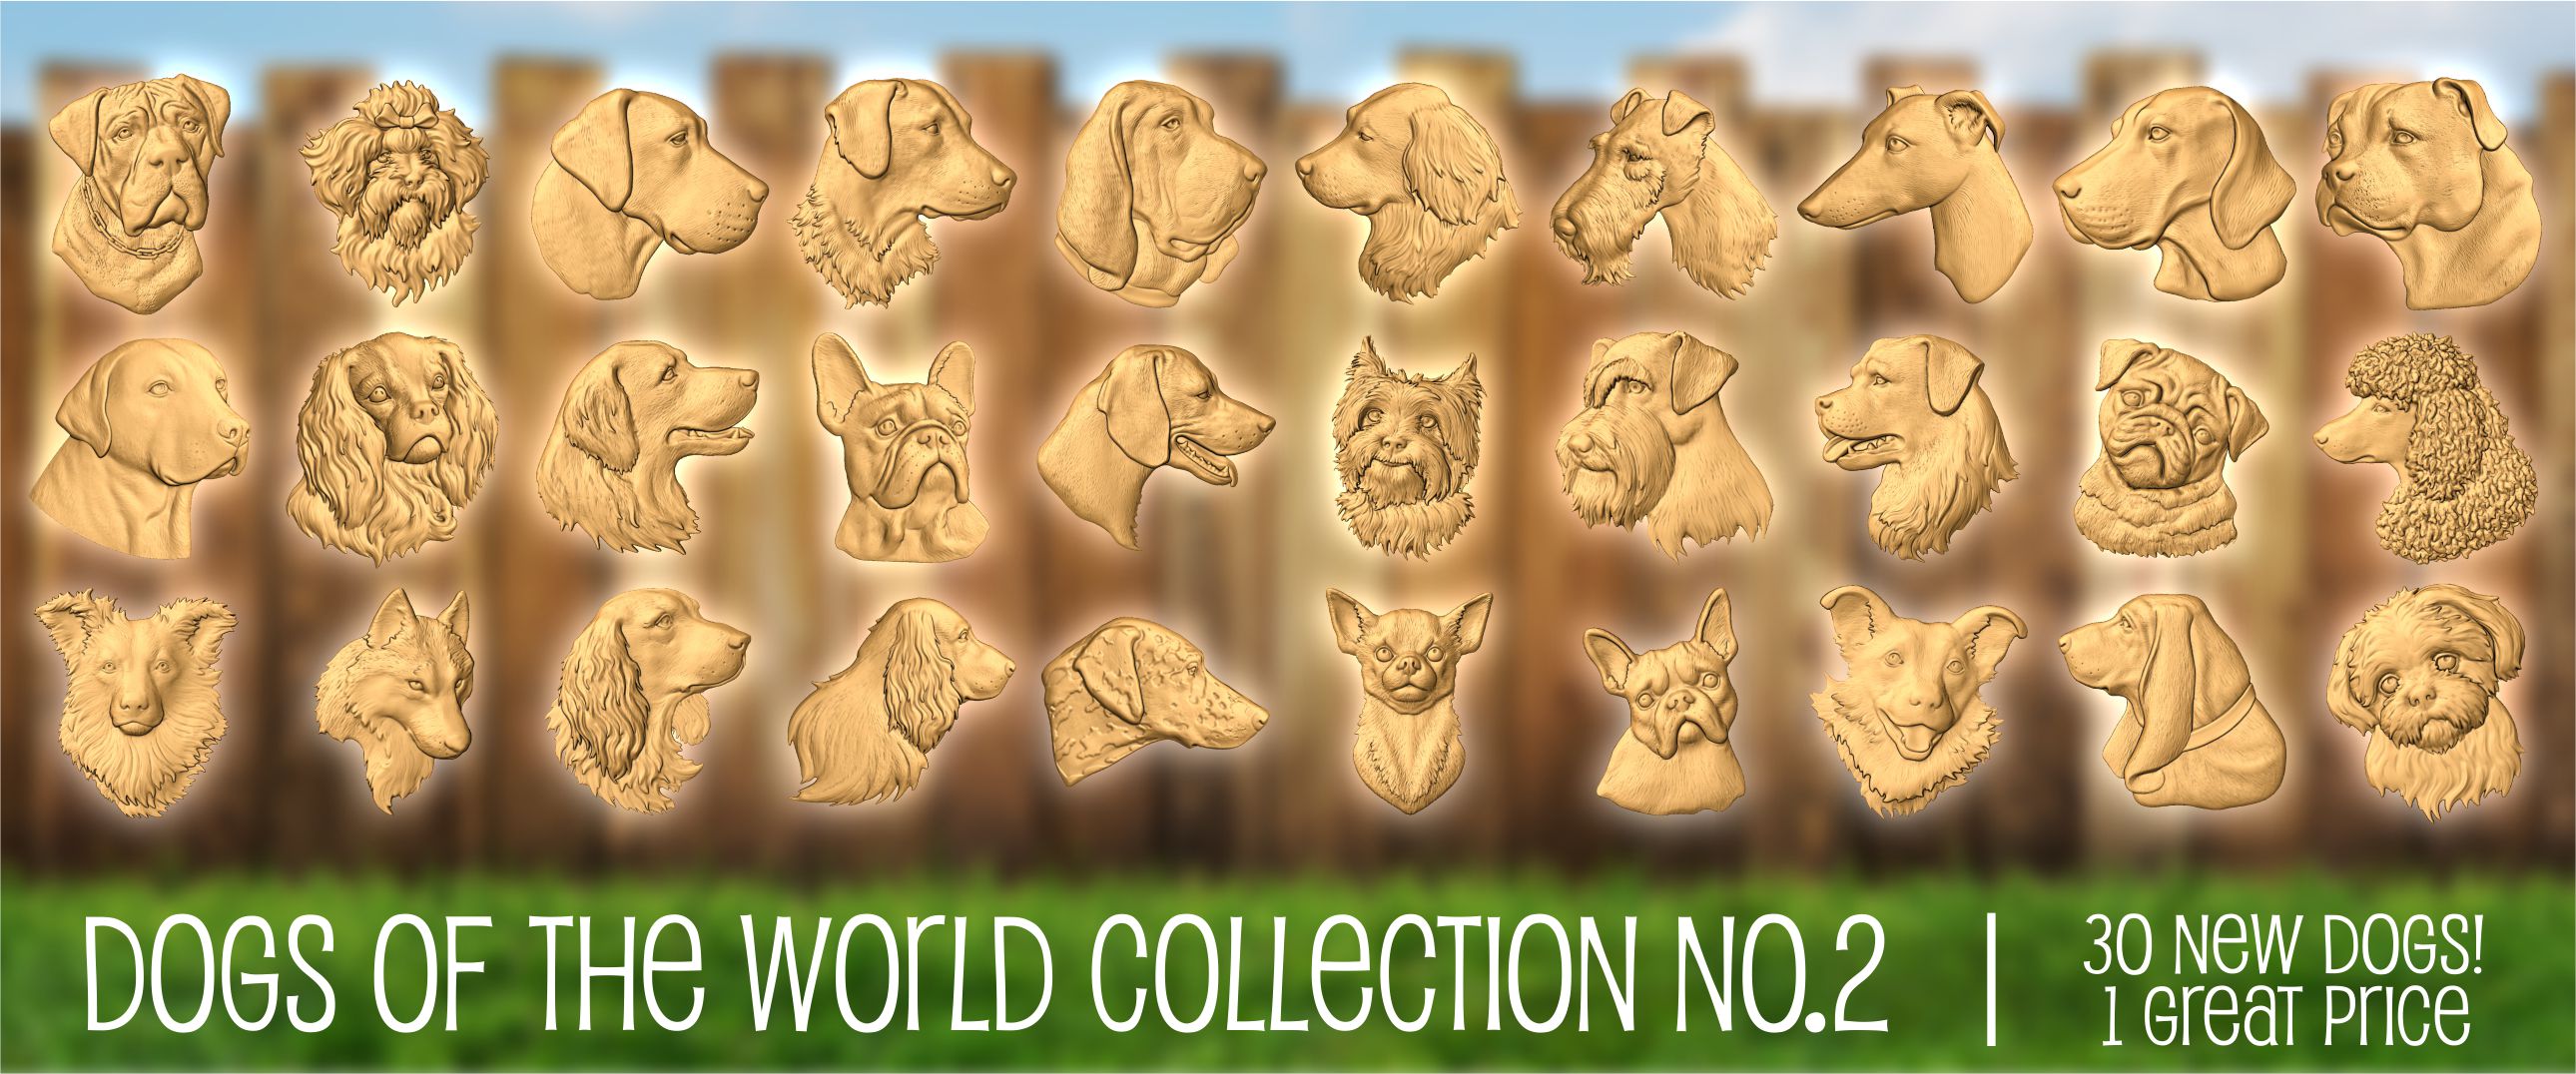 Dogs of the World Collection No.2